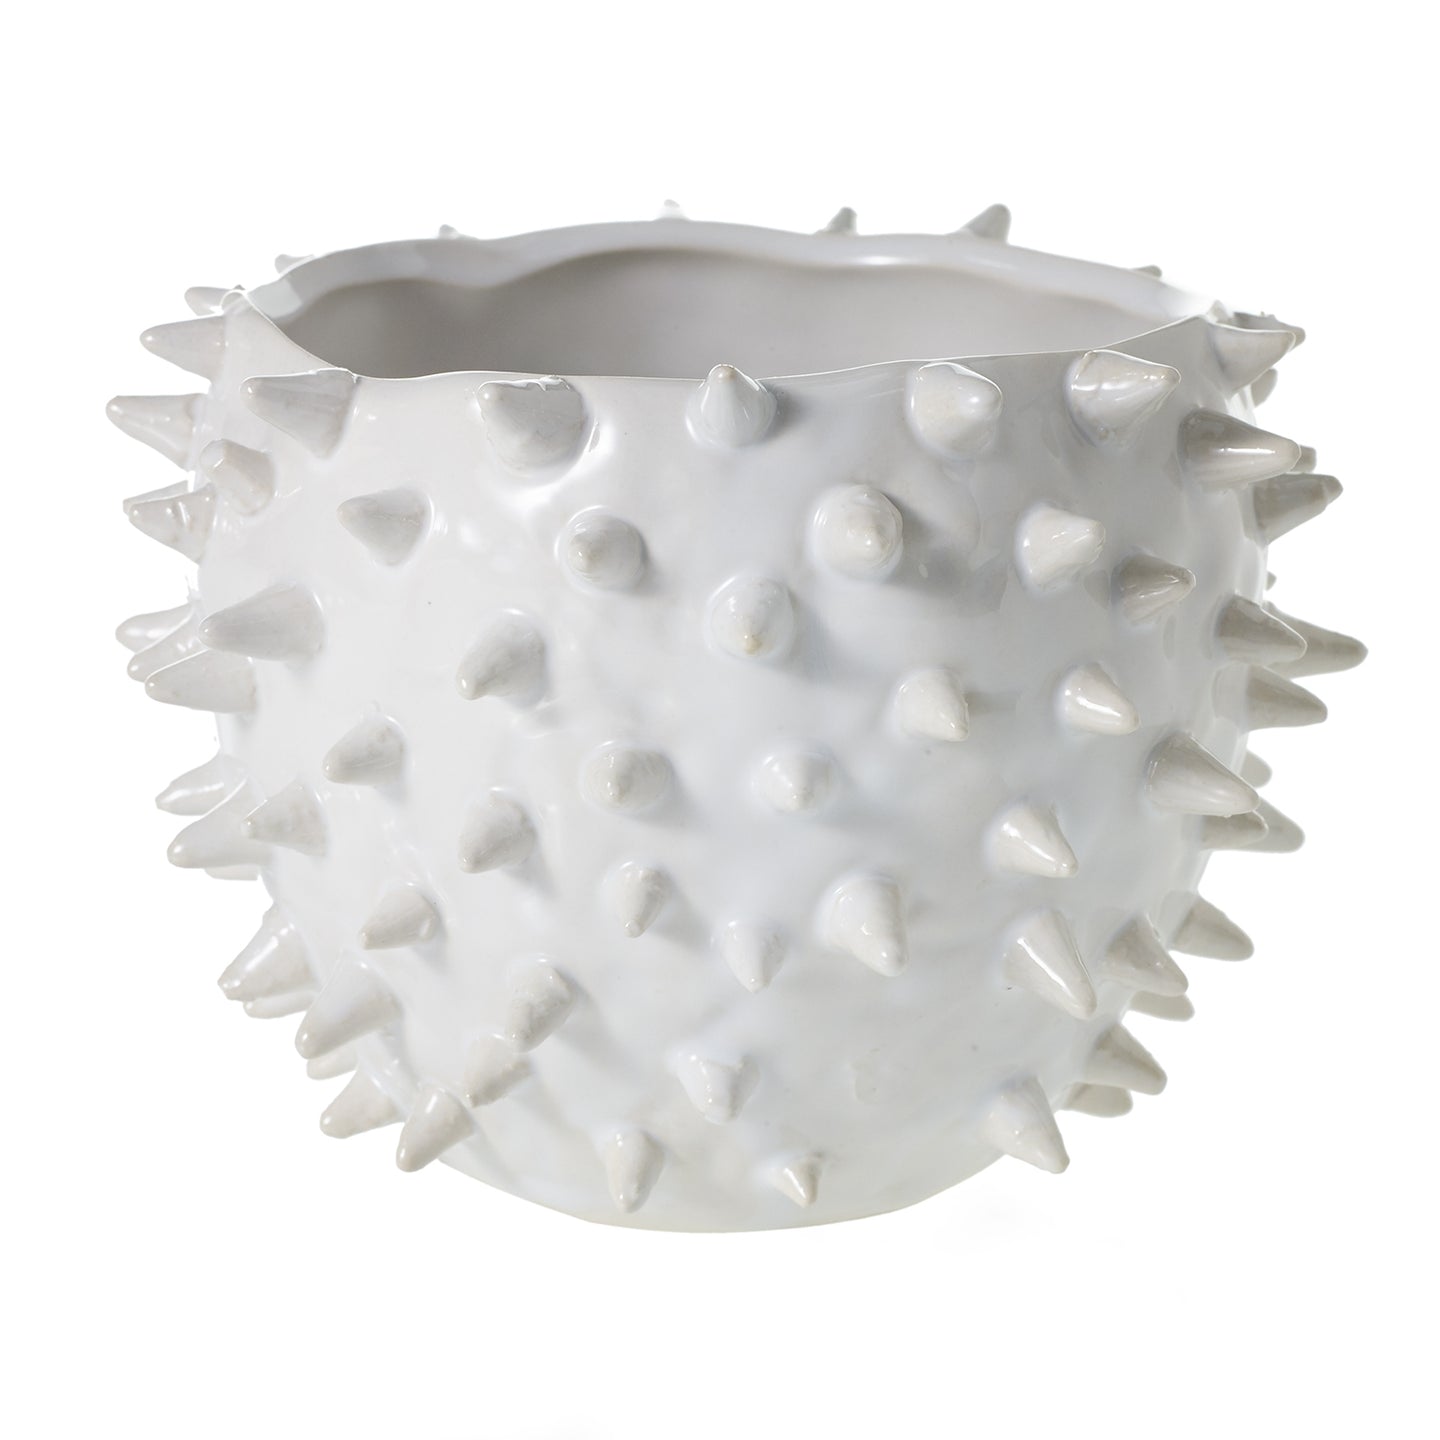 Cacti Ceramic Spiked Pot Small